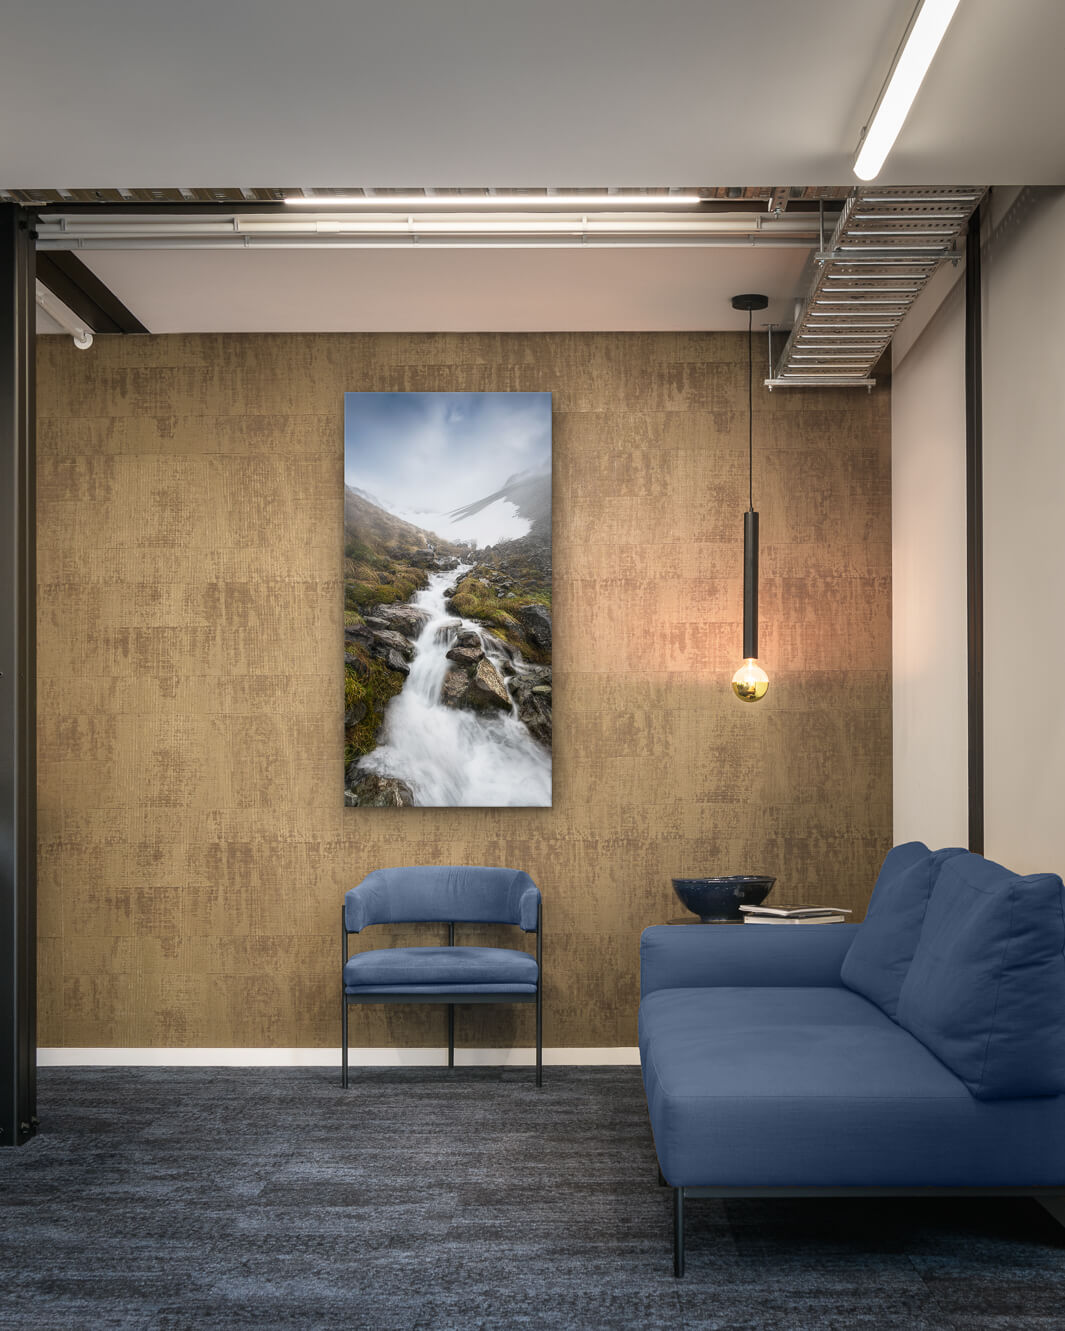 Canvas photo of New Zealand landscape on the wall of an industrial office with couch, chair and pendant light.